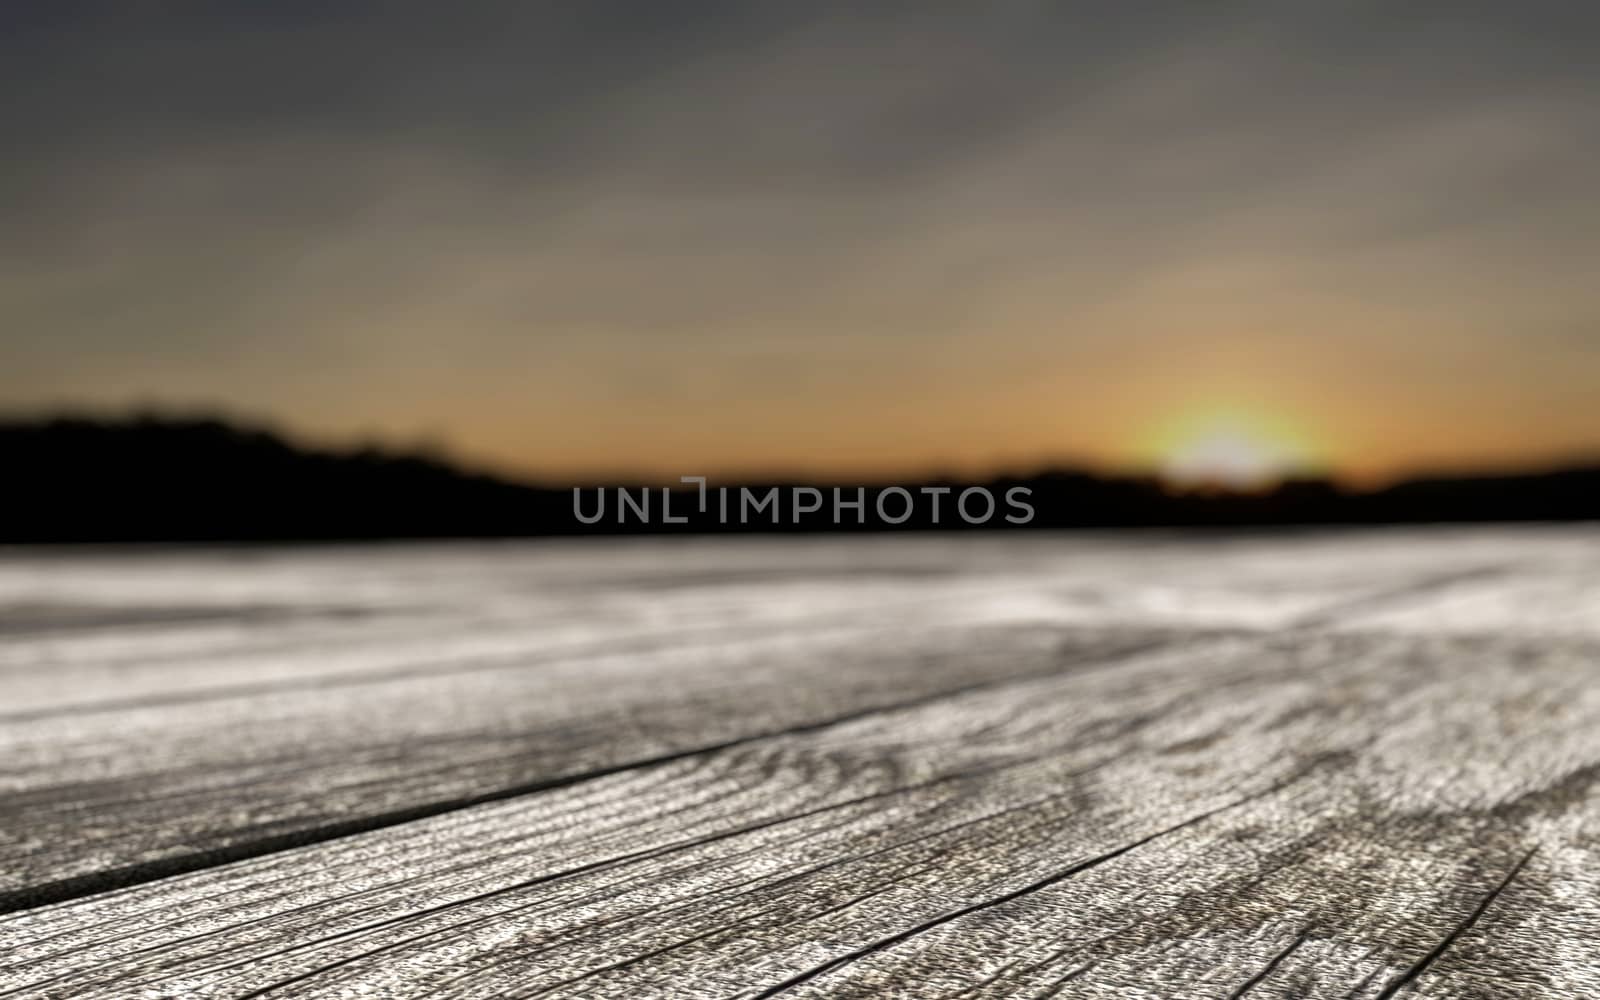 wooden table on a romantic sunset background perspective blurred 3d rendered concept